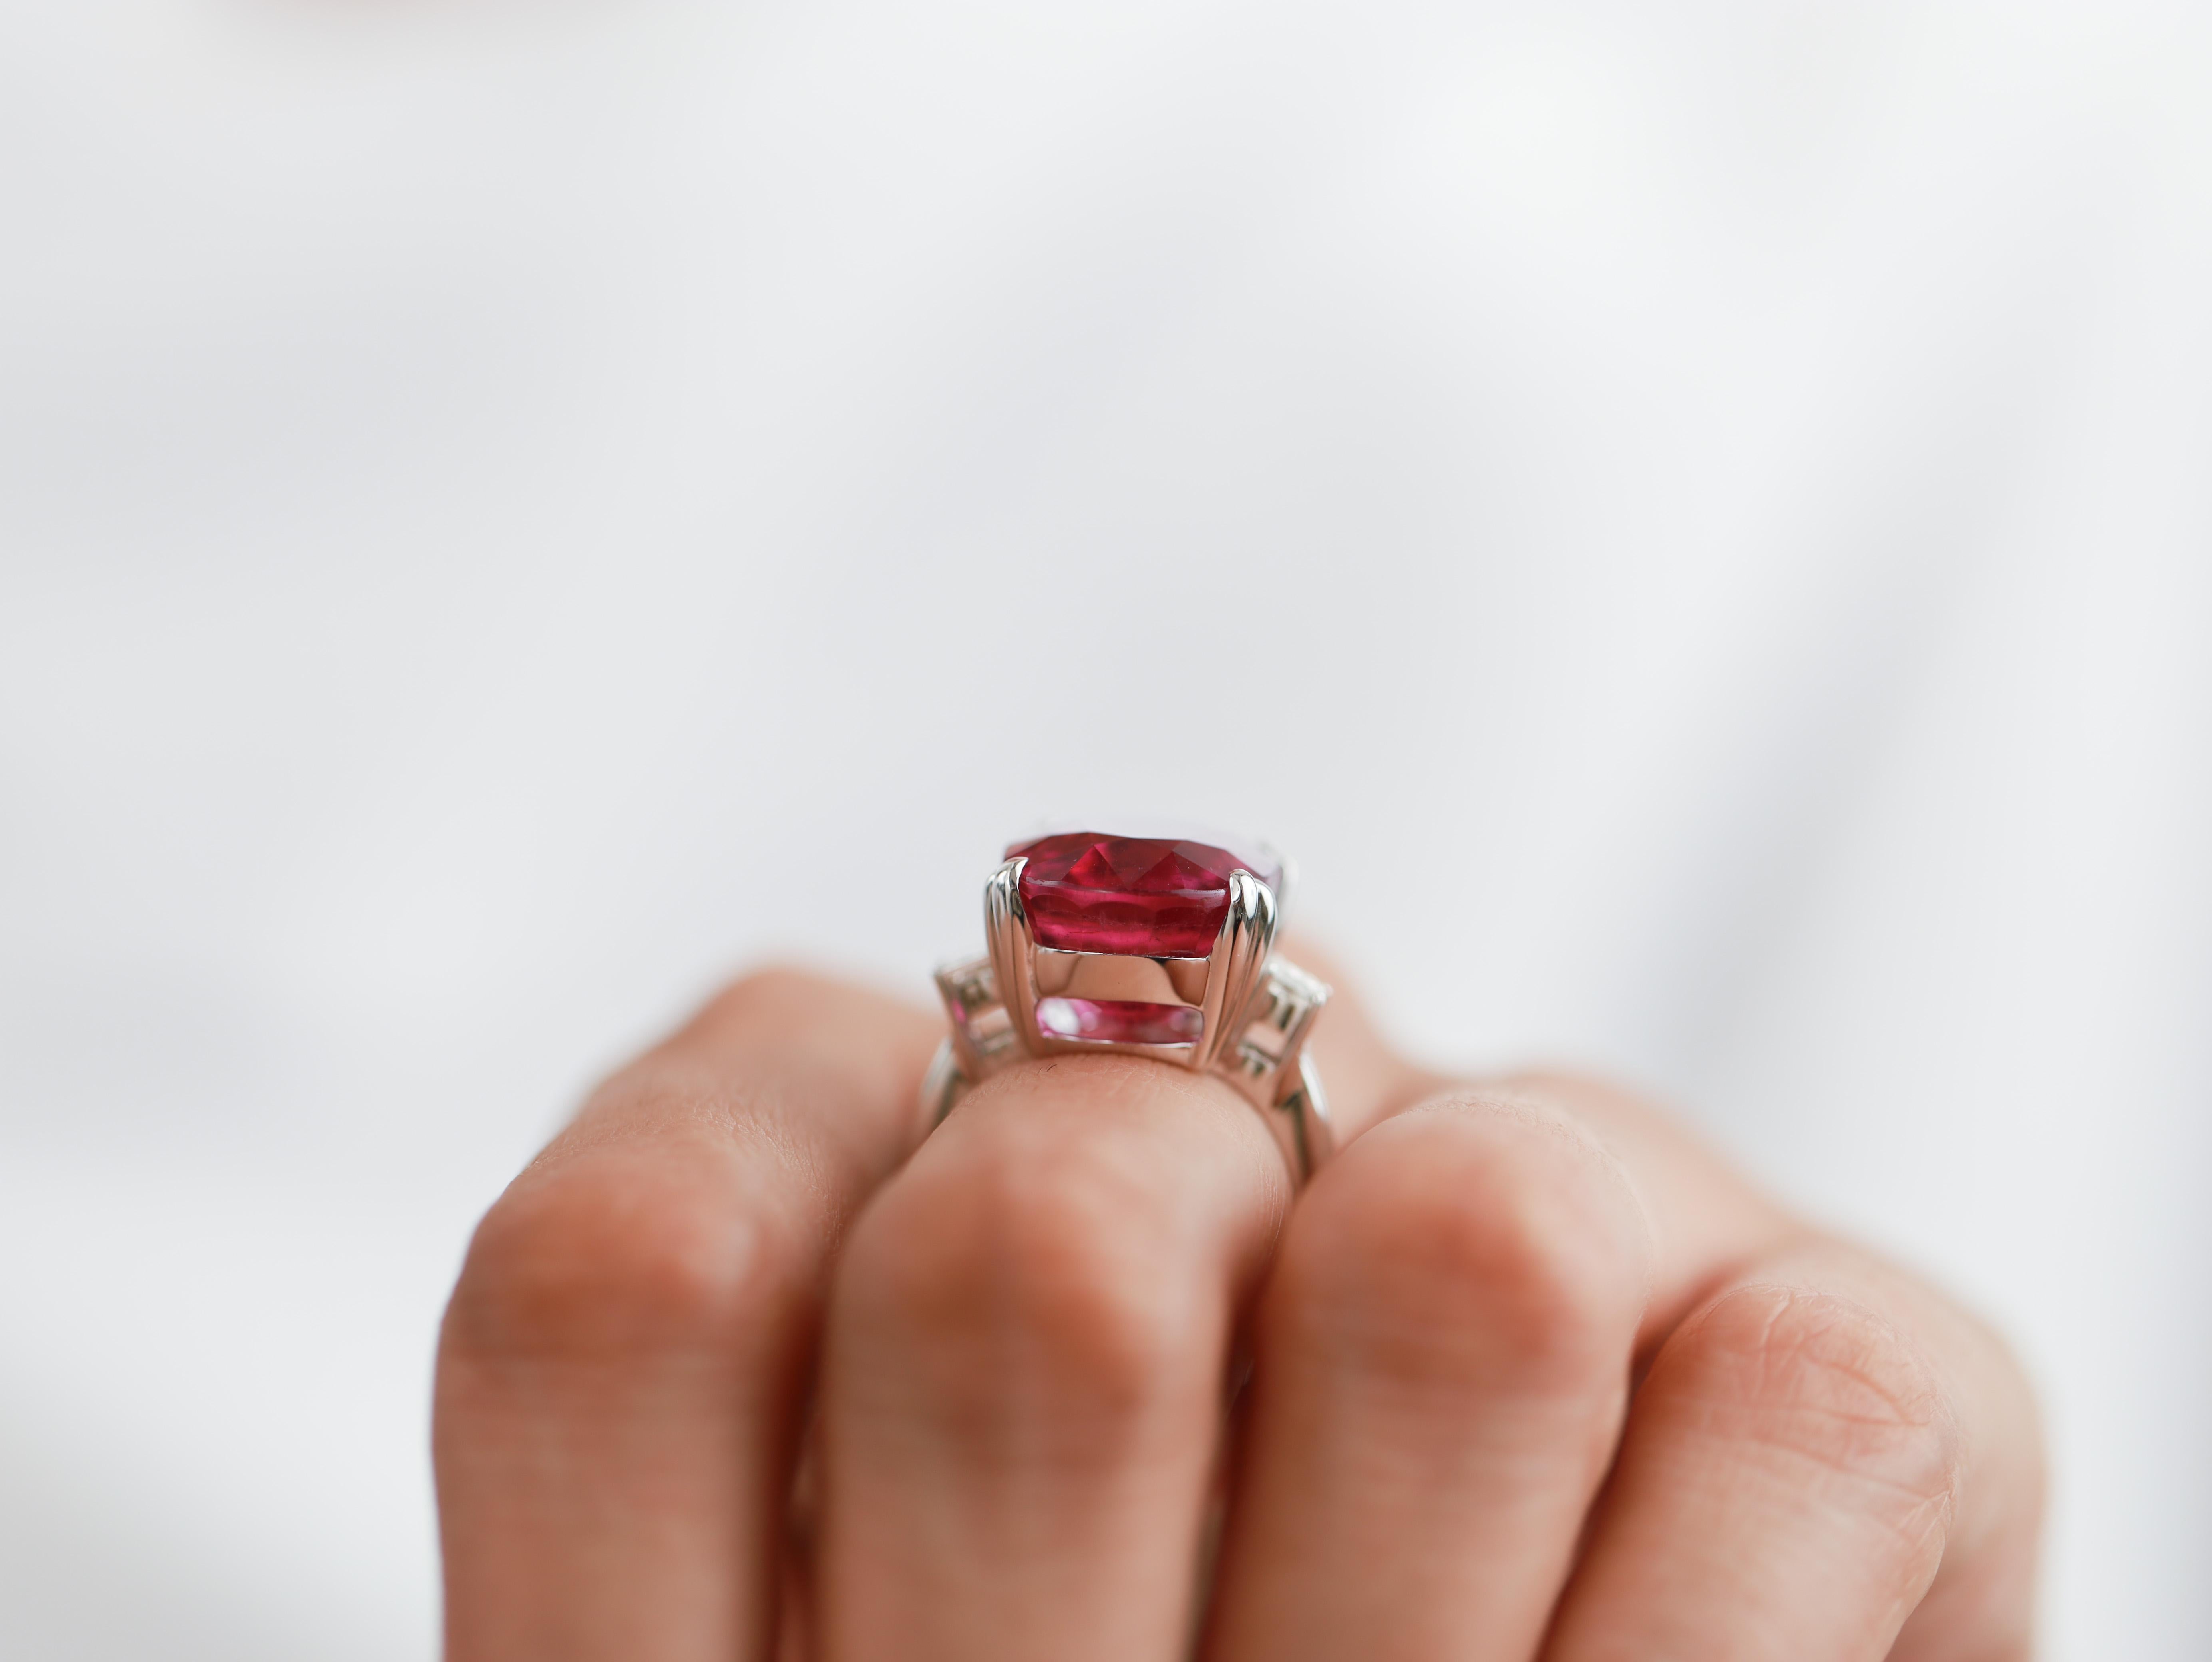 8 Carat Oval Cut Rubellite Tourmaline with 1 Ct Diamonds Cocktail Ring 18k White For Sale 3